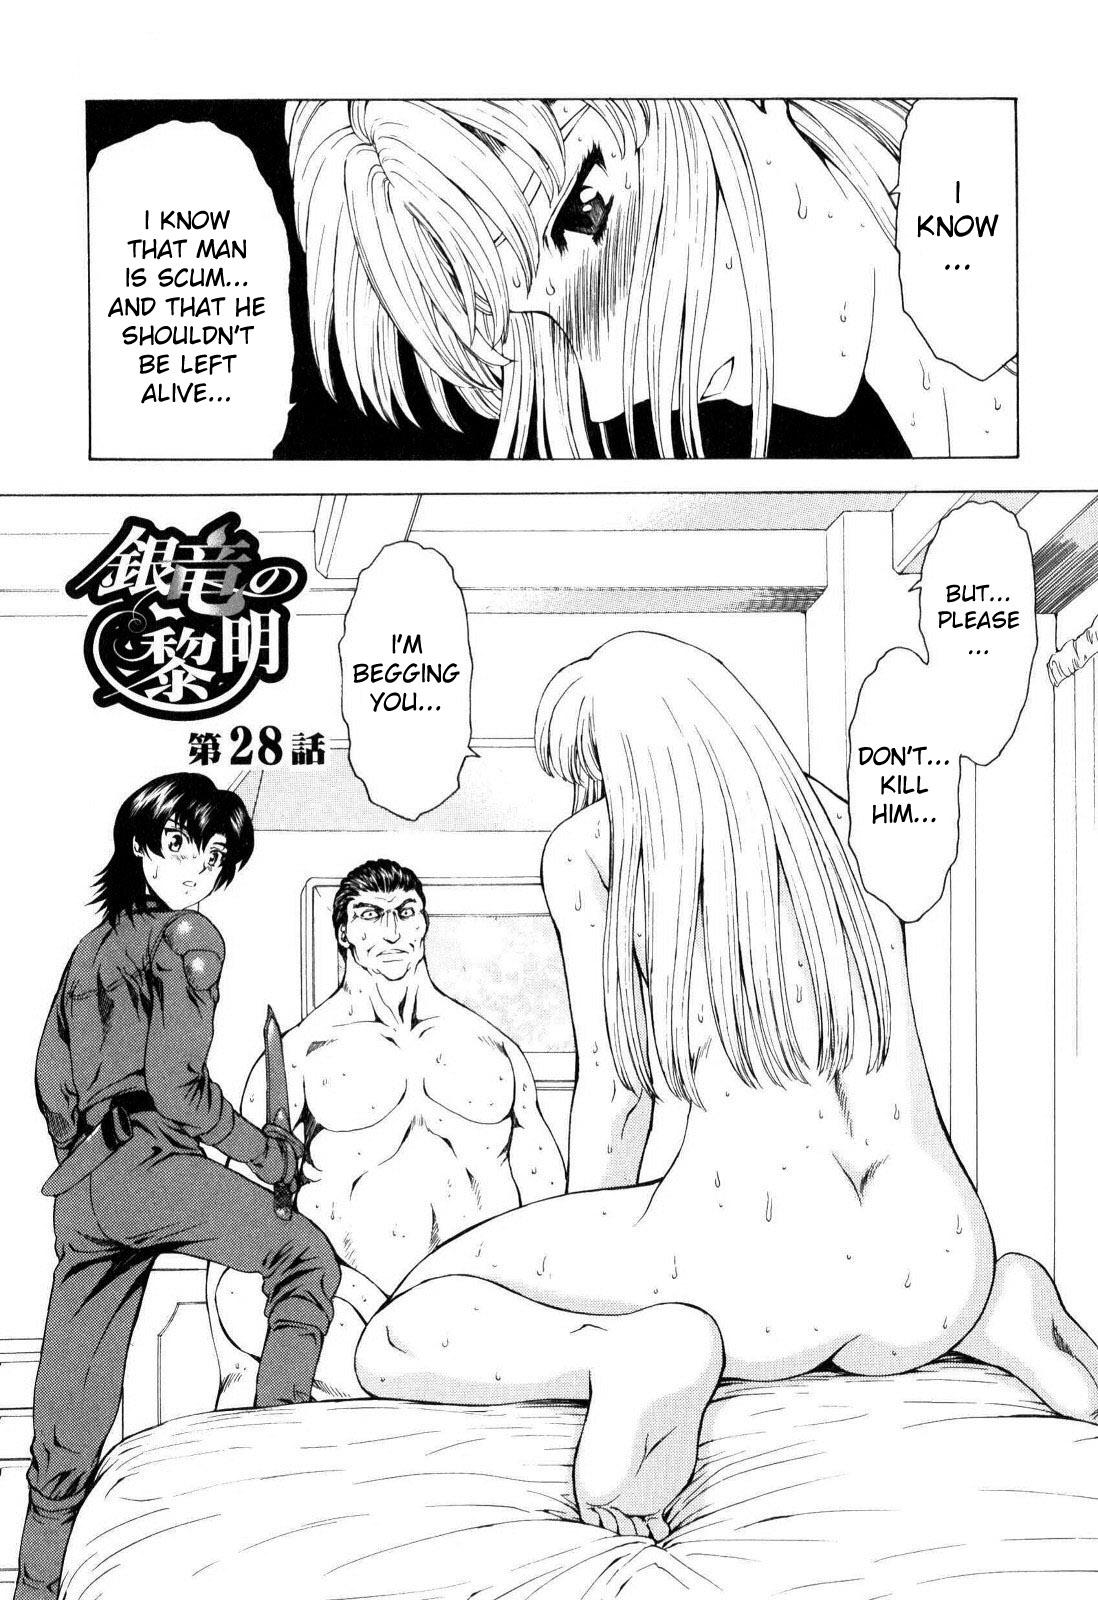 Old Vs Young Ginryuu no Reimei | Dawn of the Silver Dragon Vol. 4 Chinese - Page 12